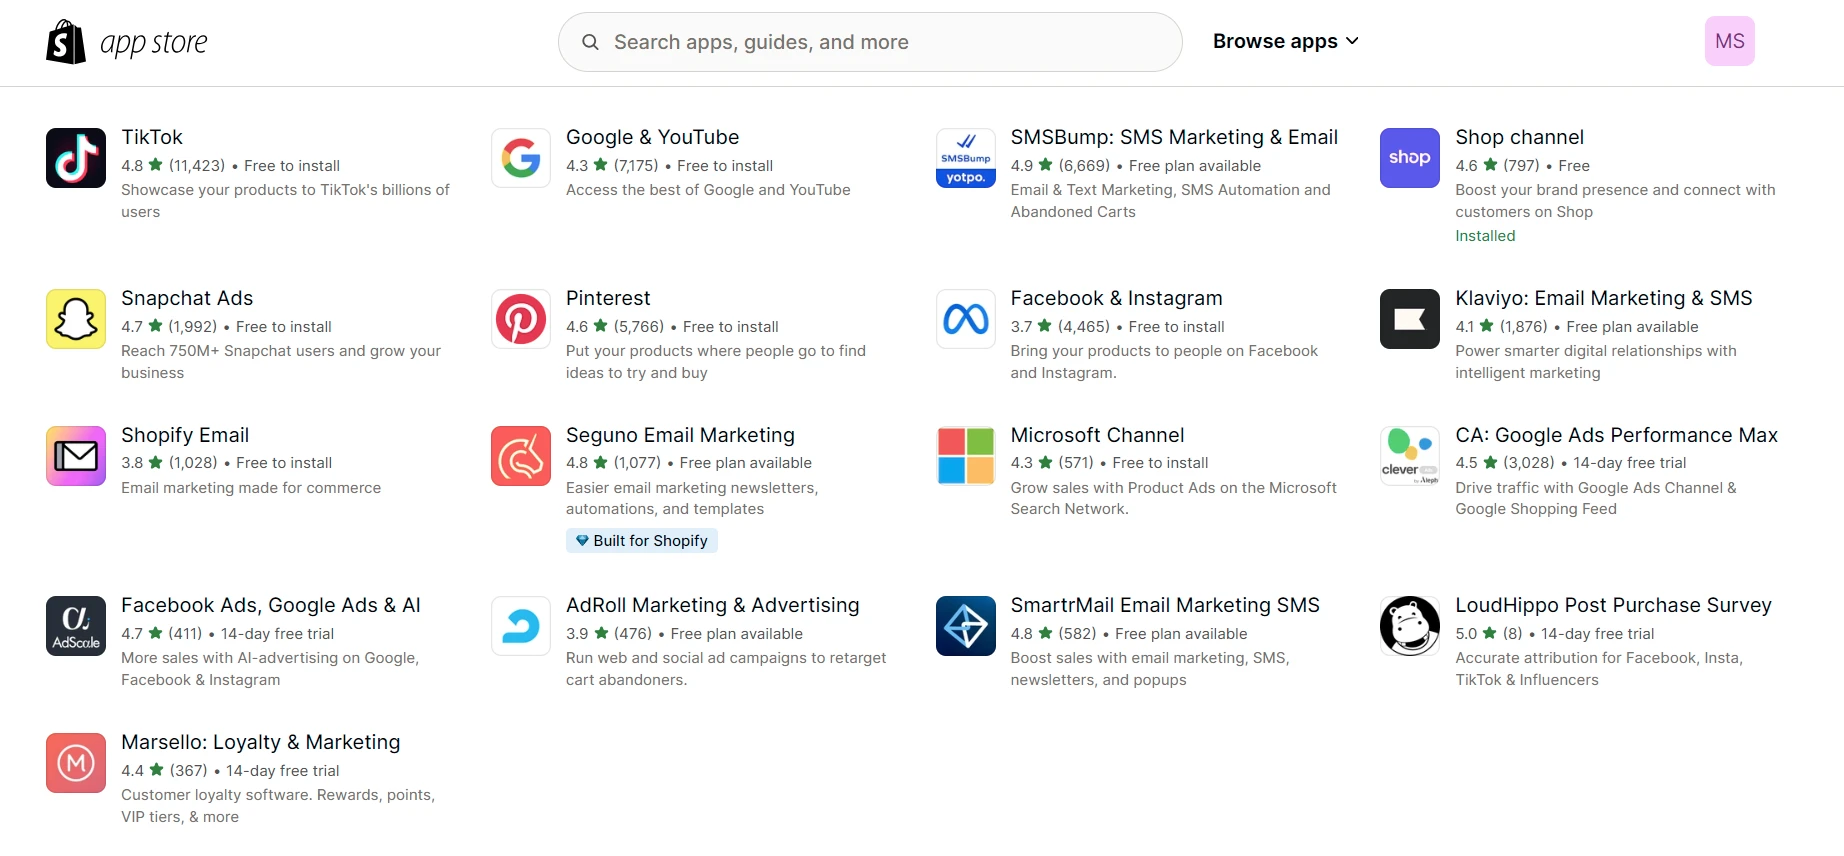 marketing apps in shopify app store